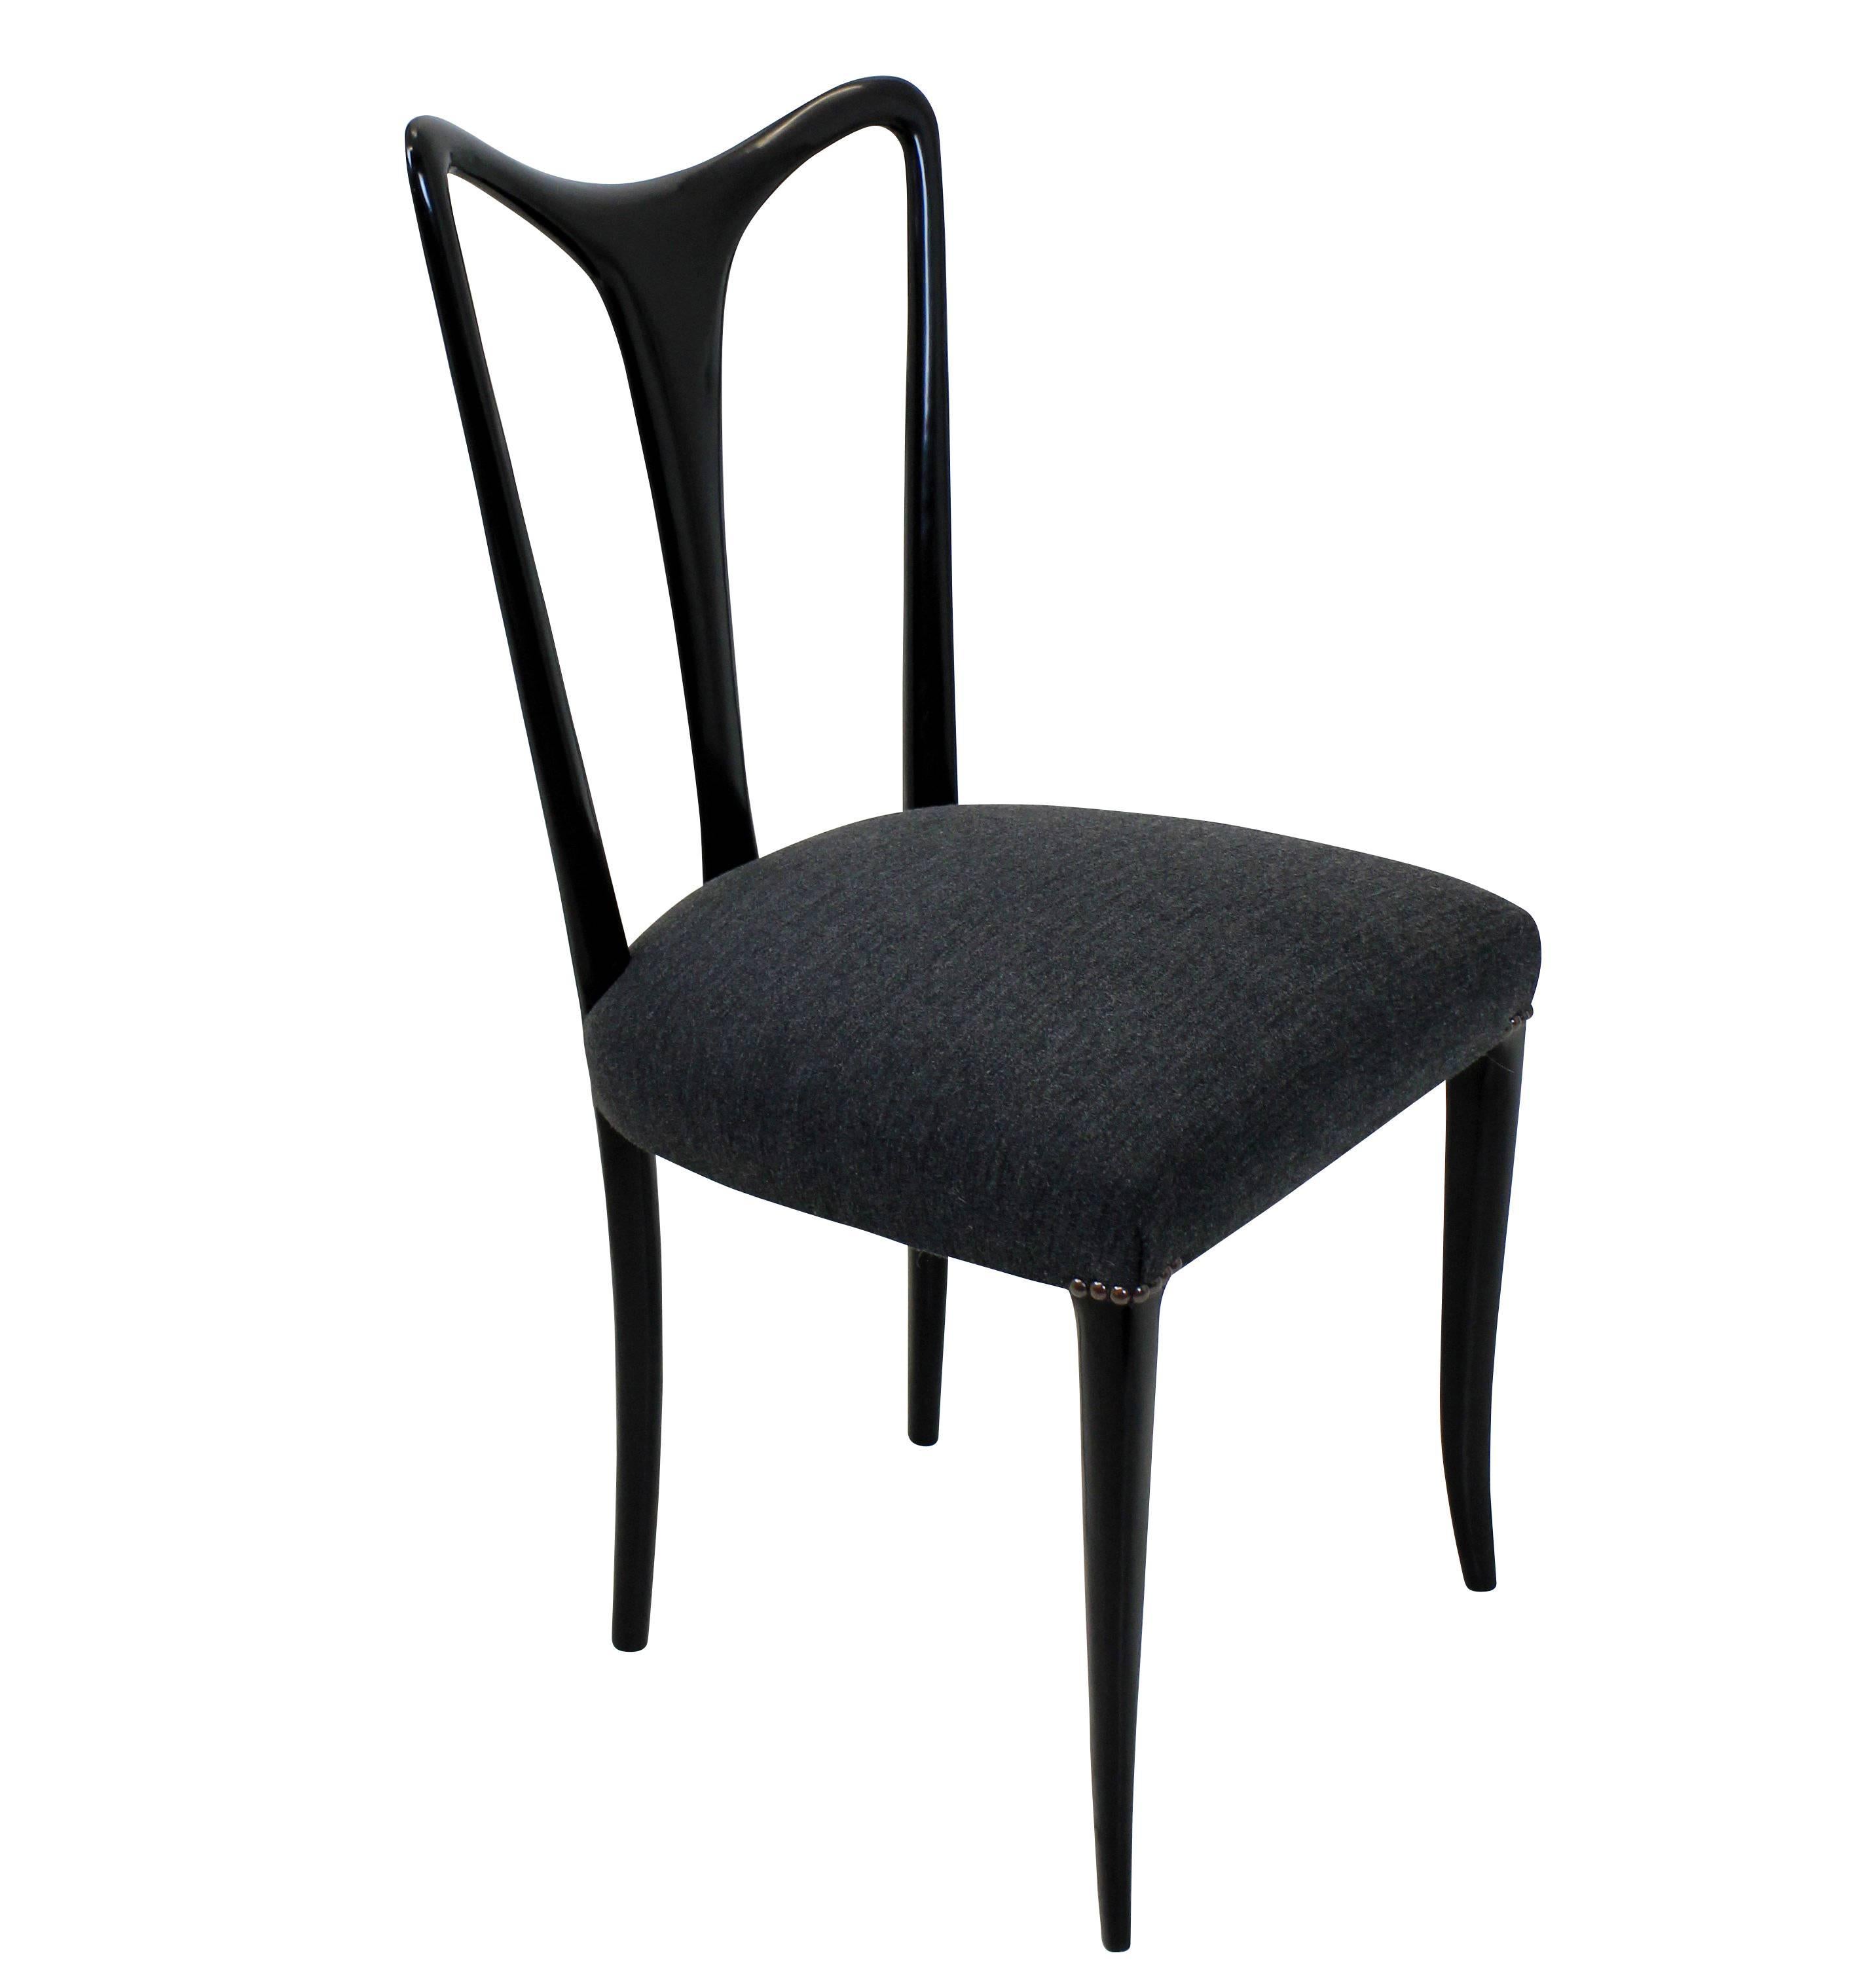 A set of four elegant dining chairs by Ulrich. Of finely tapering design in ebonized wood with newly upholstered grey seats.